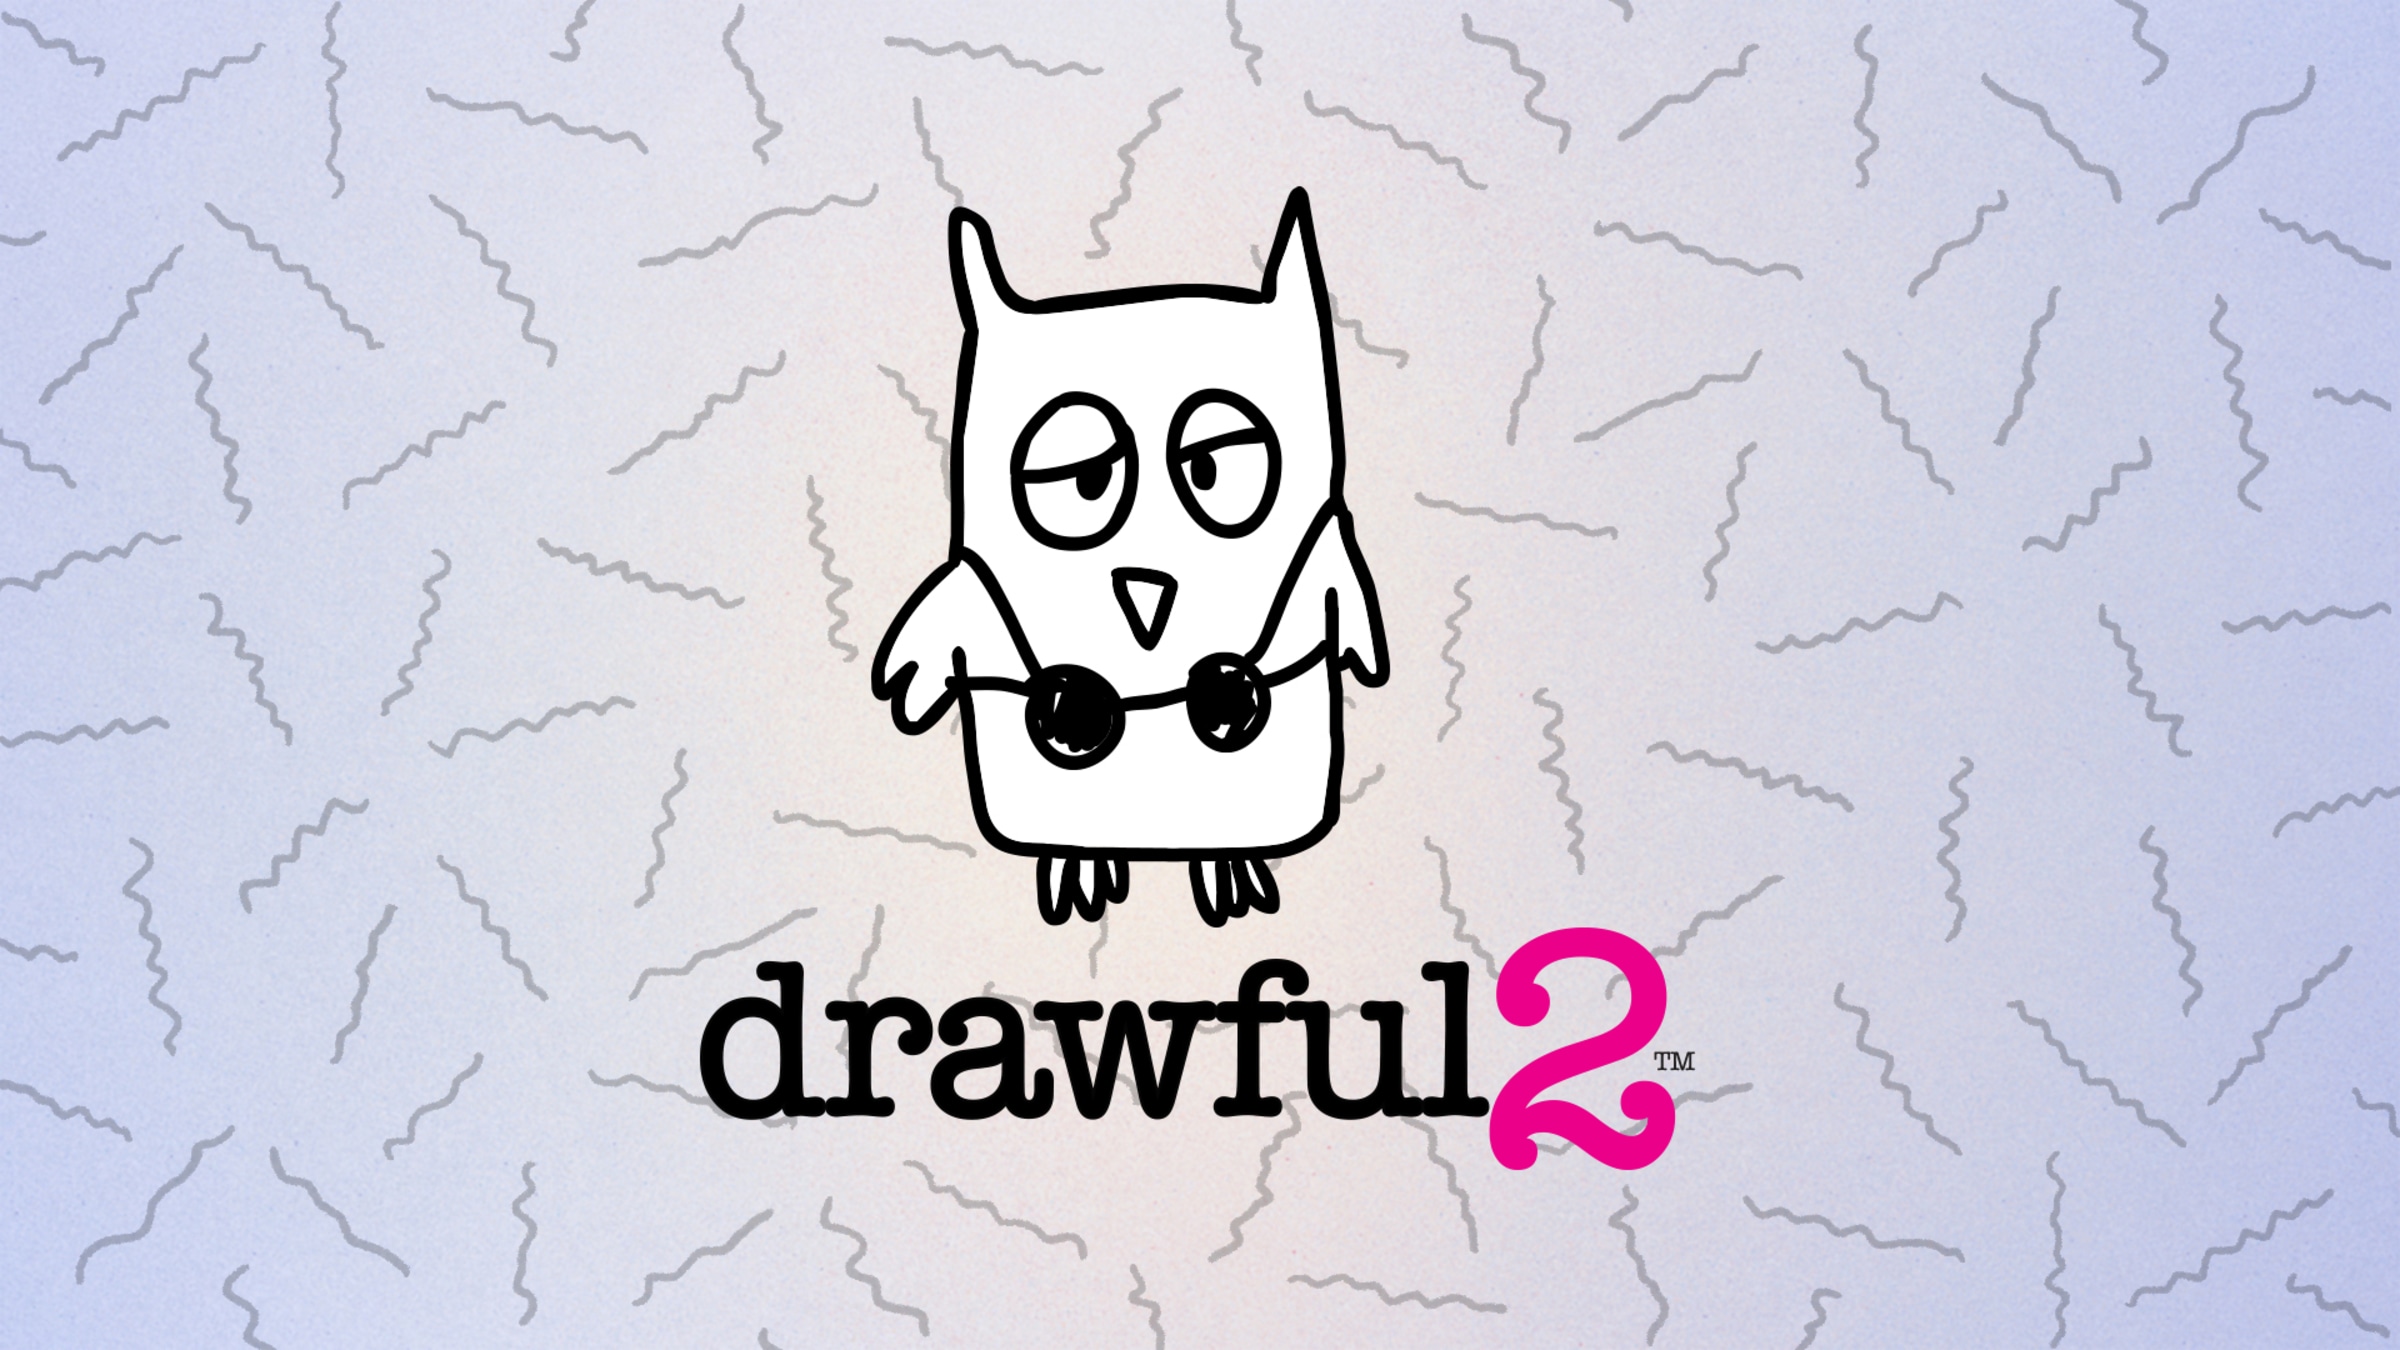 Drawful 2 for Nintendo Switch Nintendo Official Site